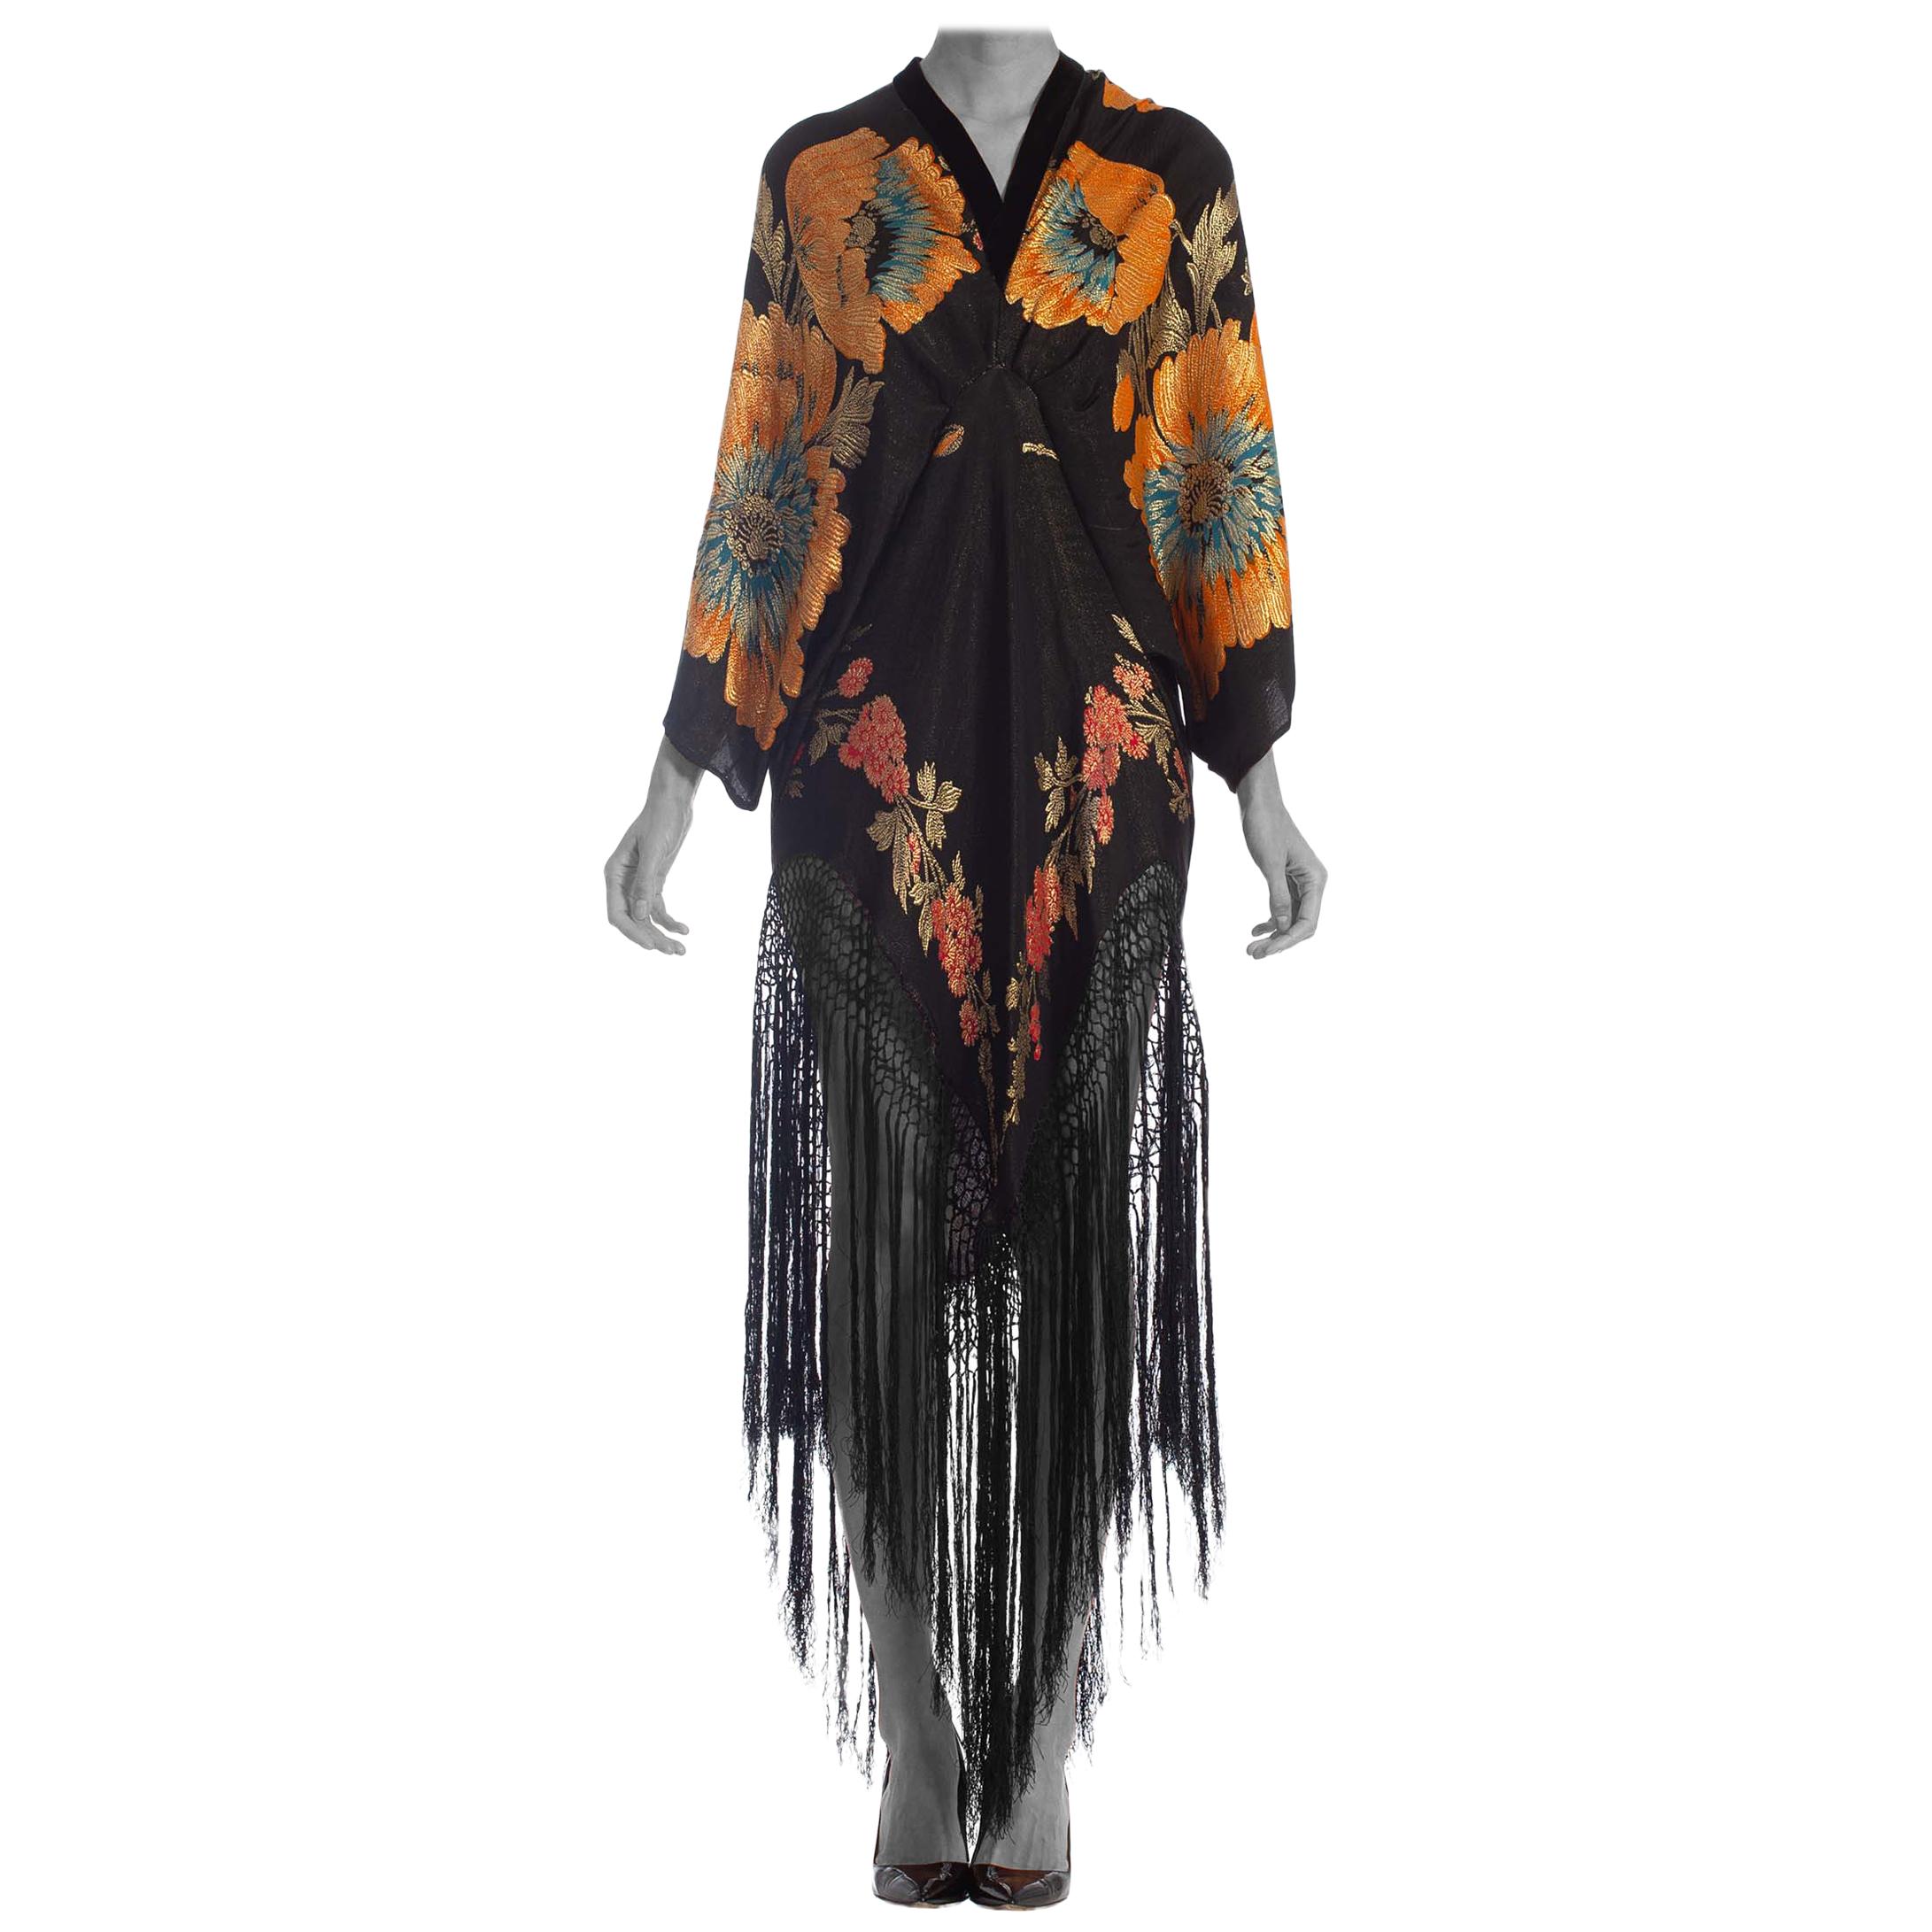 MORPHEW COLLECTION Floral Gold Lamé Silk Tunic Dress With Fringe